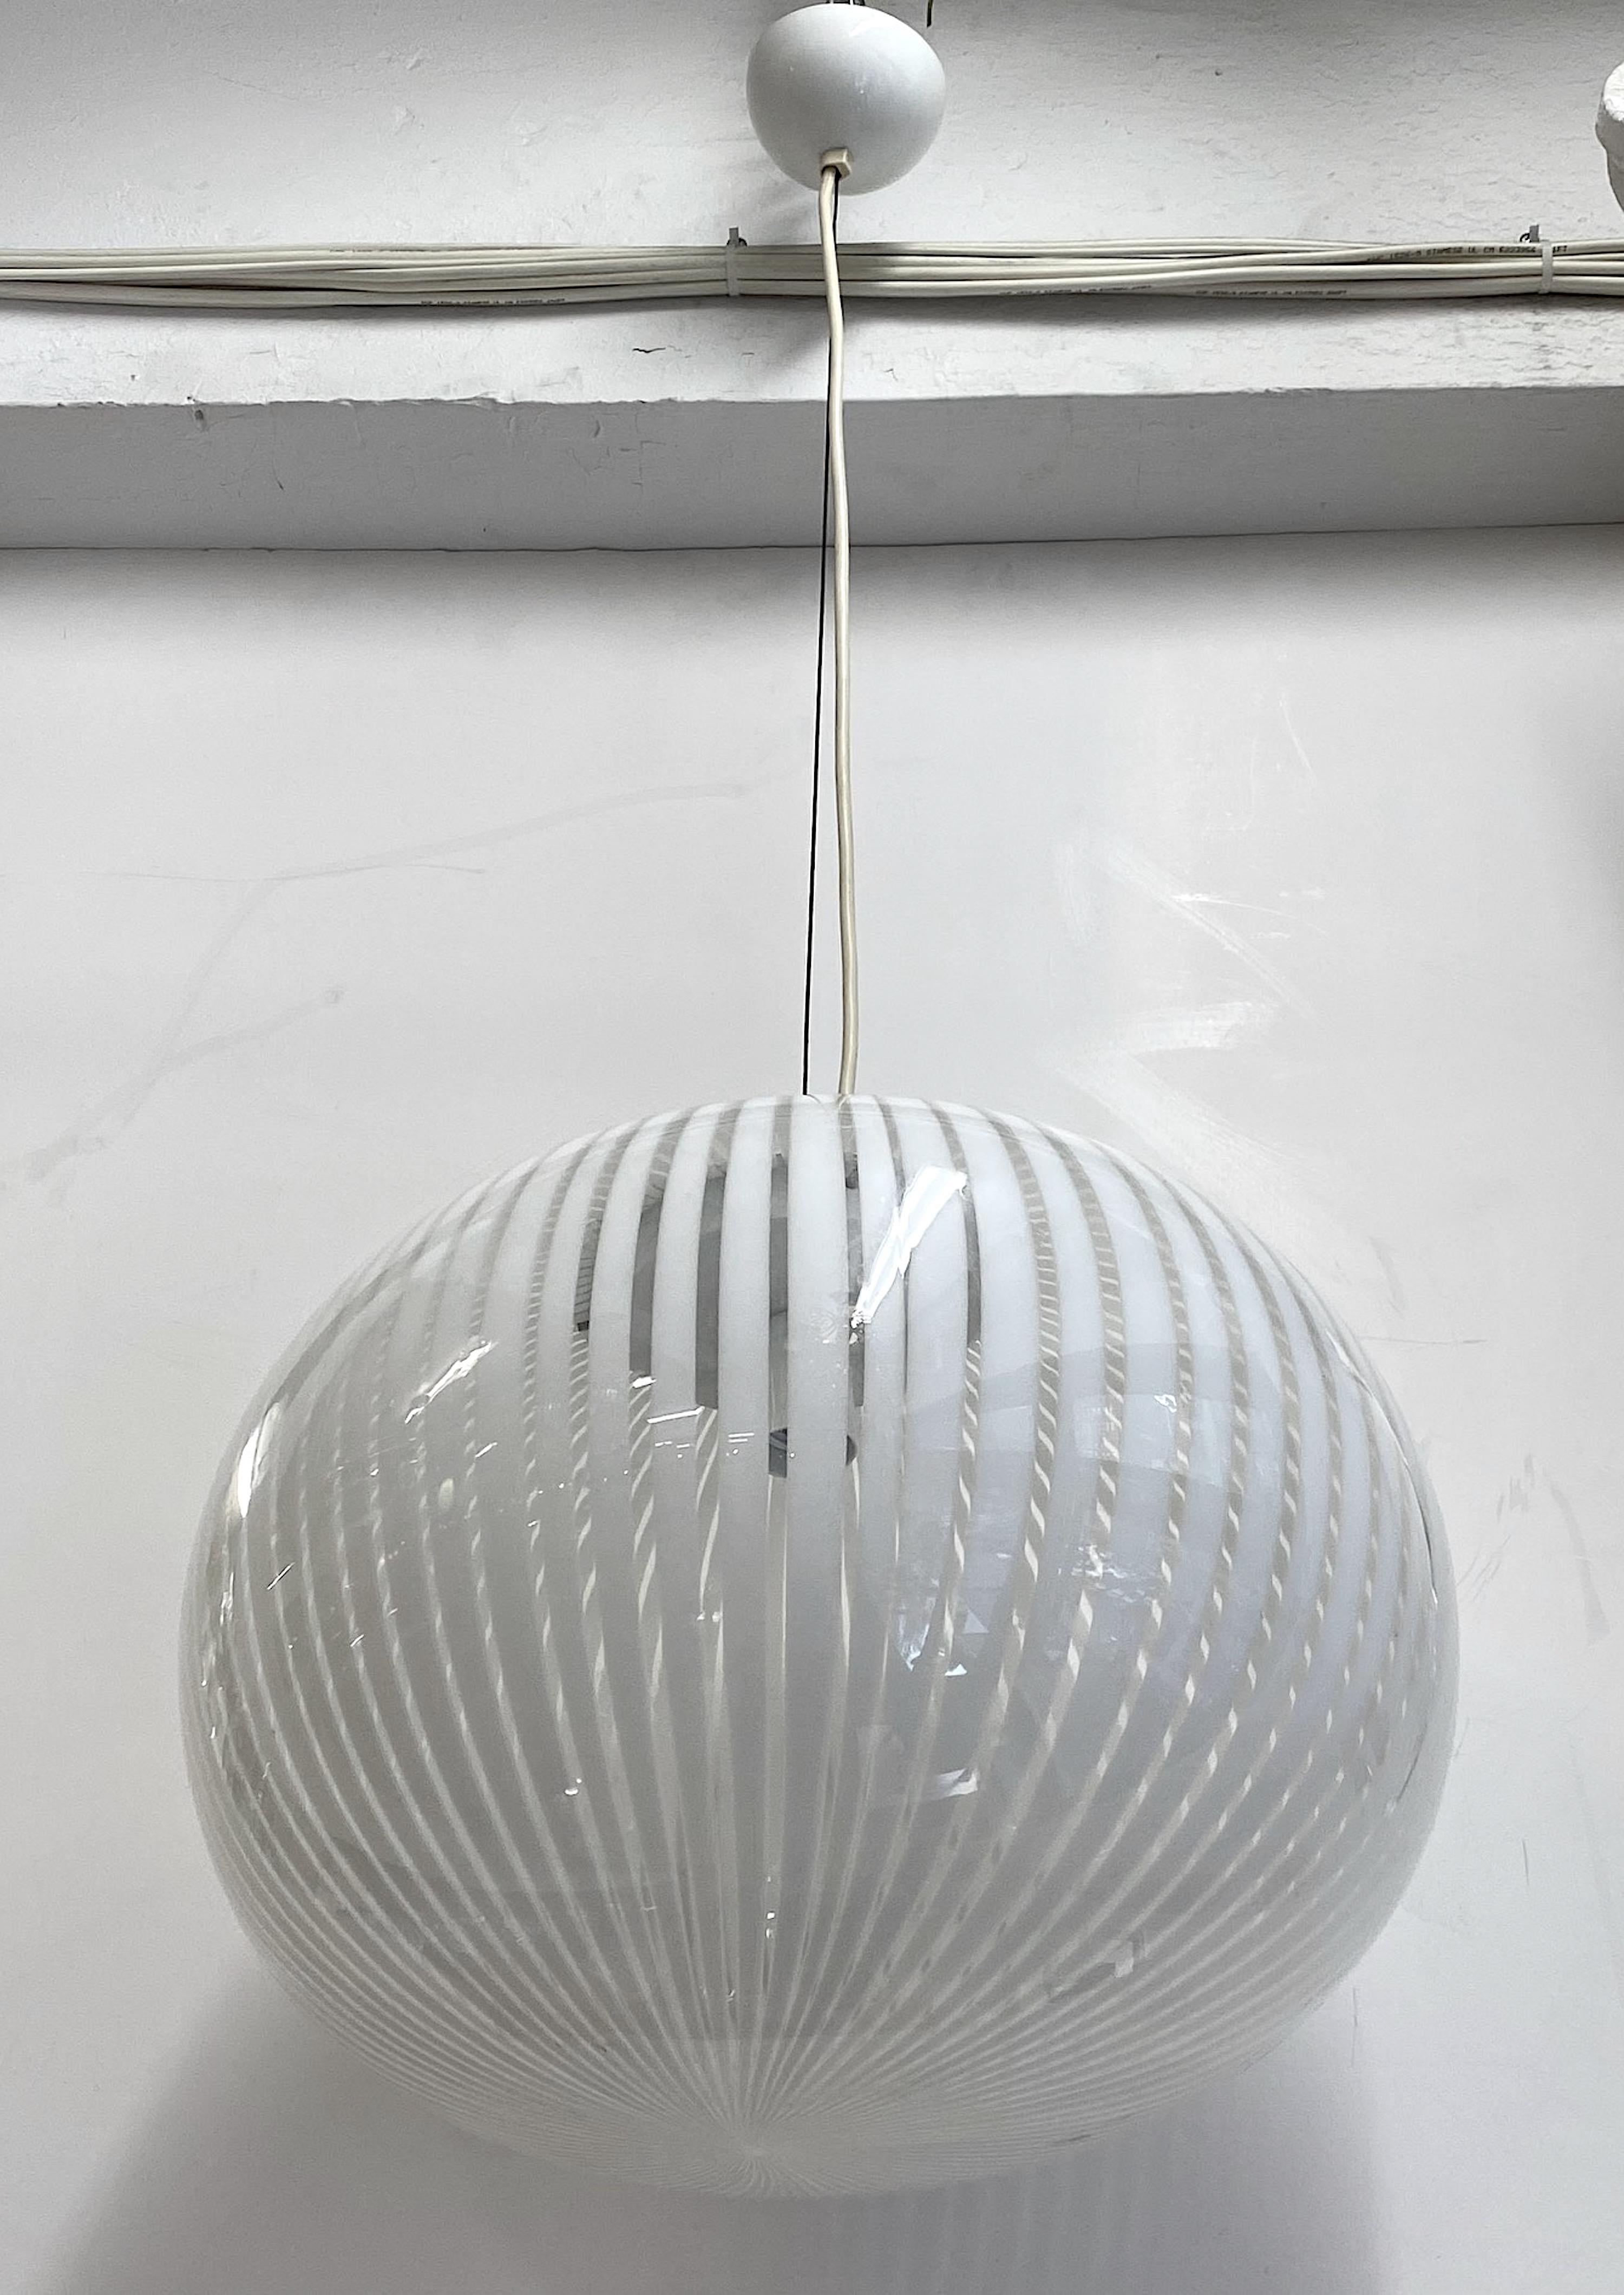 A wonderful 1970s Italian stripe glass pendant light from Murano, Italy. The hand blown globe in clear and white stripe glass houses a single standard socket. The glass globe is slightly flattened and not a perfect sphere intentionally. It measures